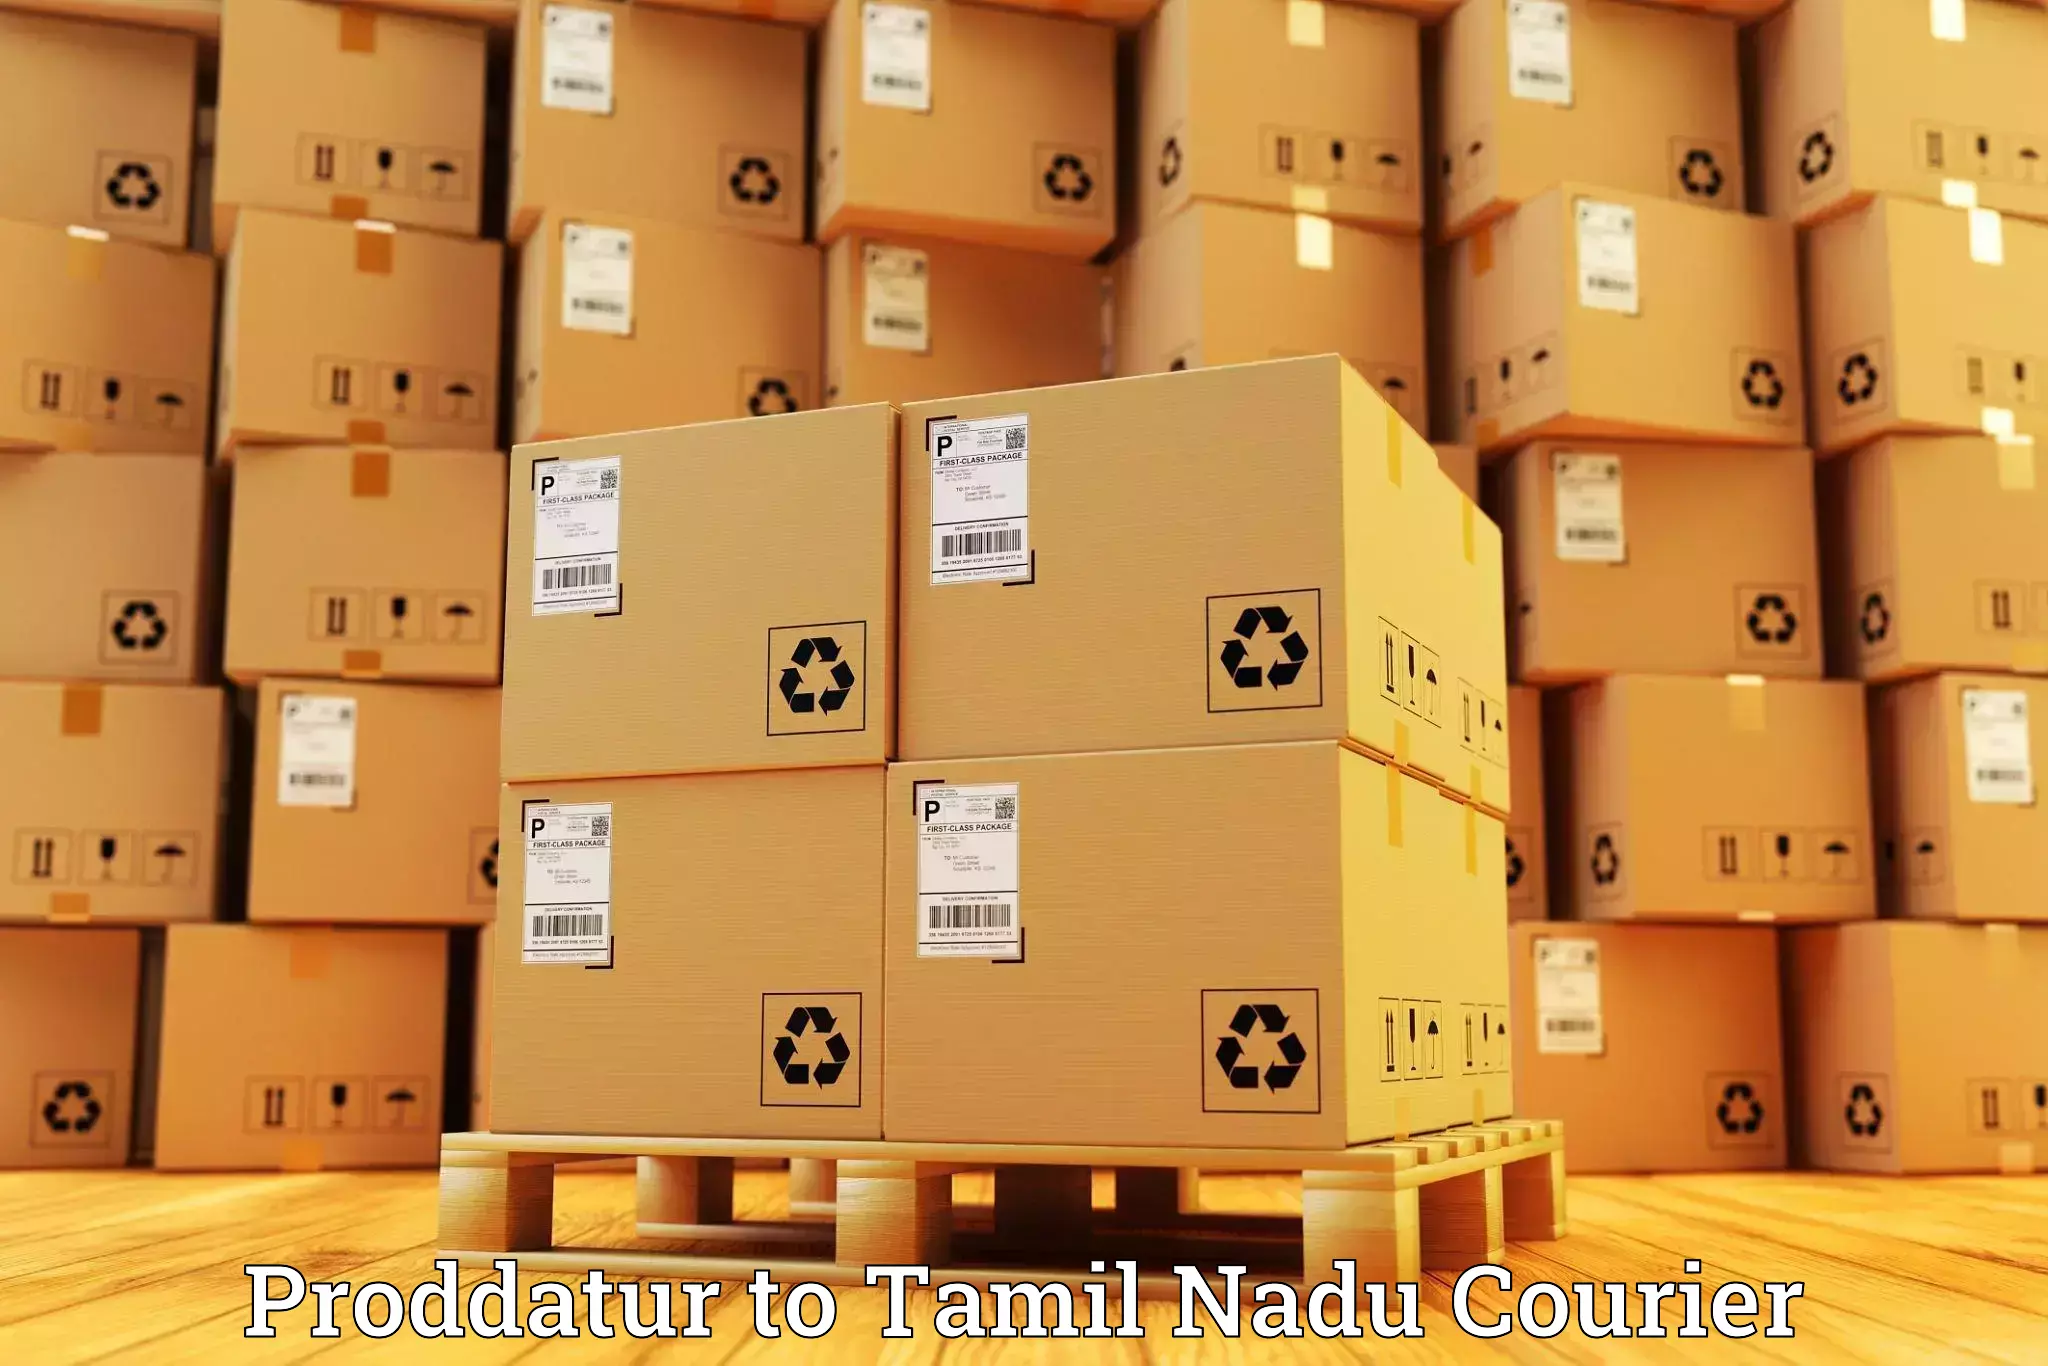 Online luggage shipping booking Proddatur to Tamil Nadu